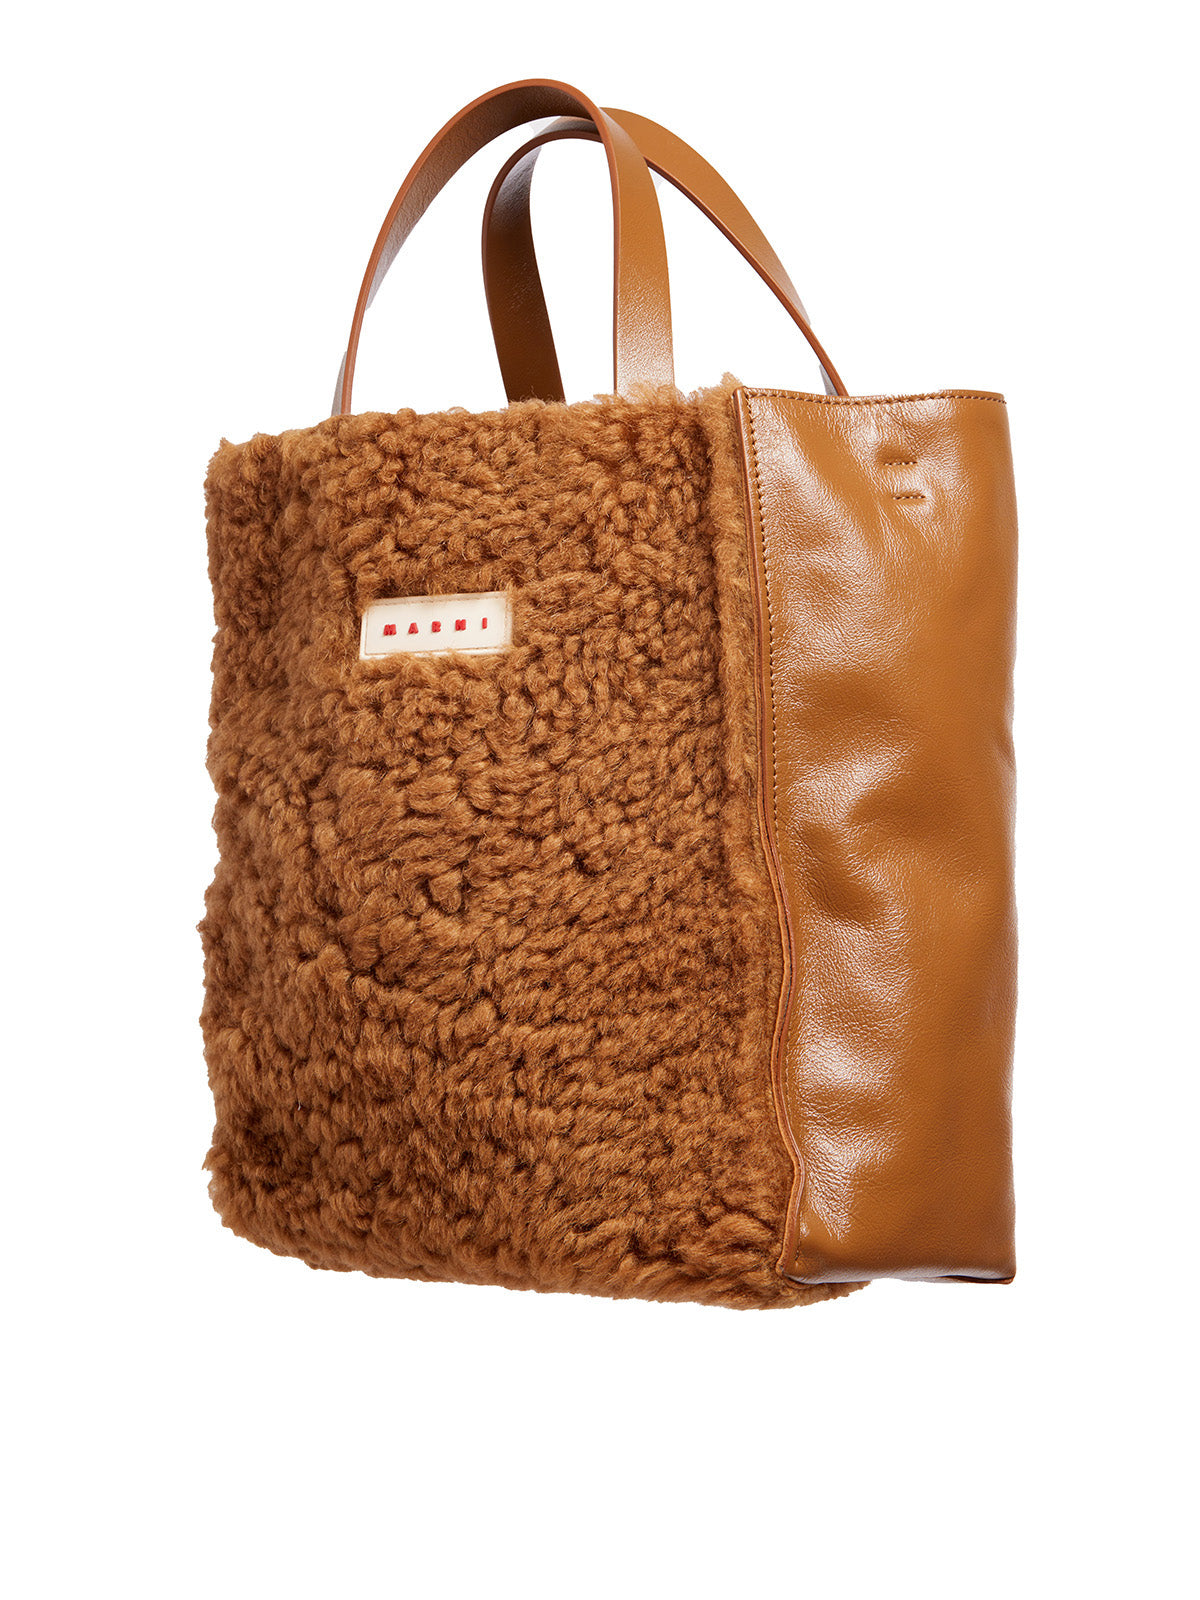 MARNI Brown Shopper Tote with Shoulder Strap and Internal Zip Pocket for Women